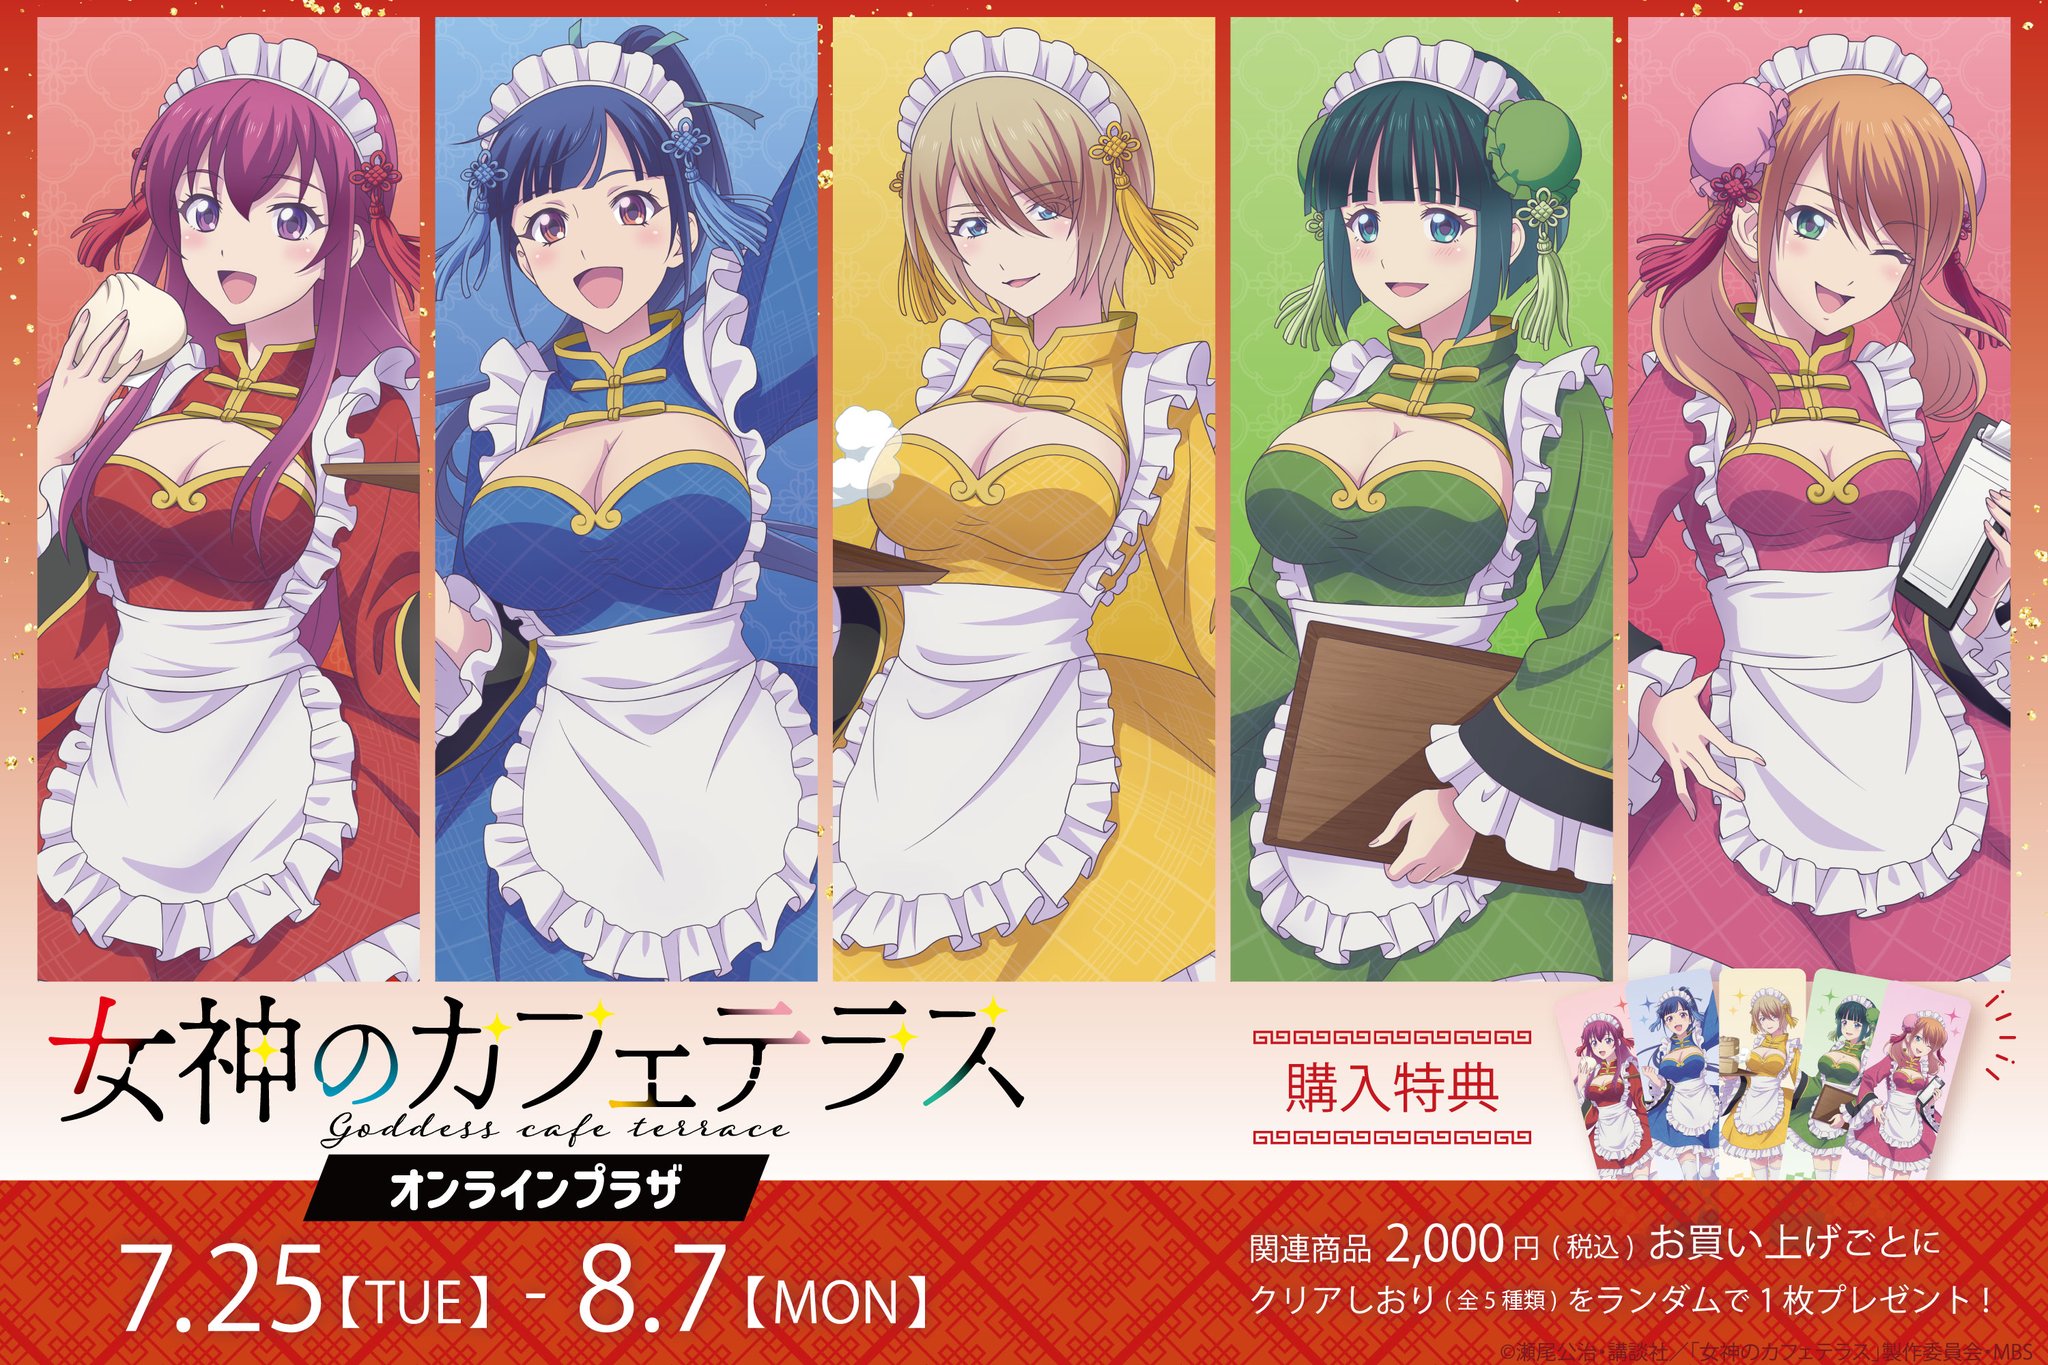 Megami no Cafe Terrace Release Schedule, The Cafe Terrace and Its